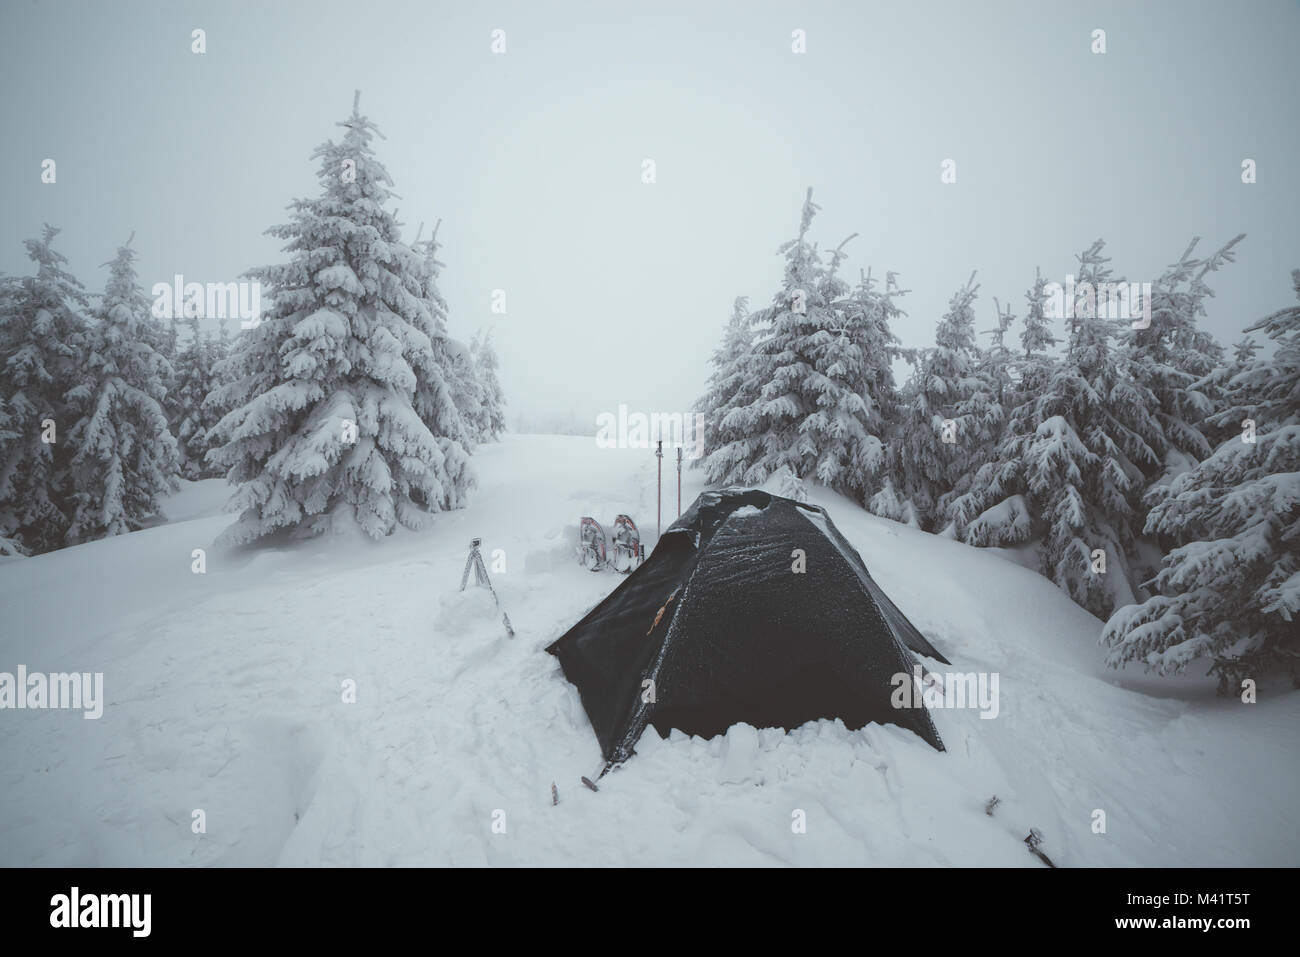 Frozen tents in the high mountain Stock Photo